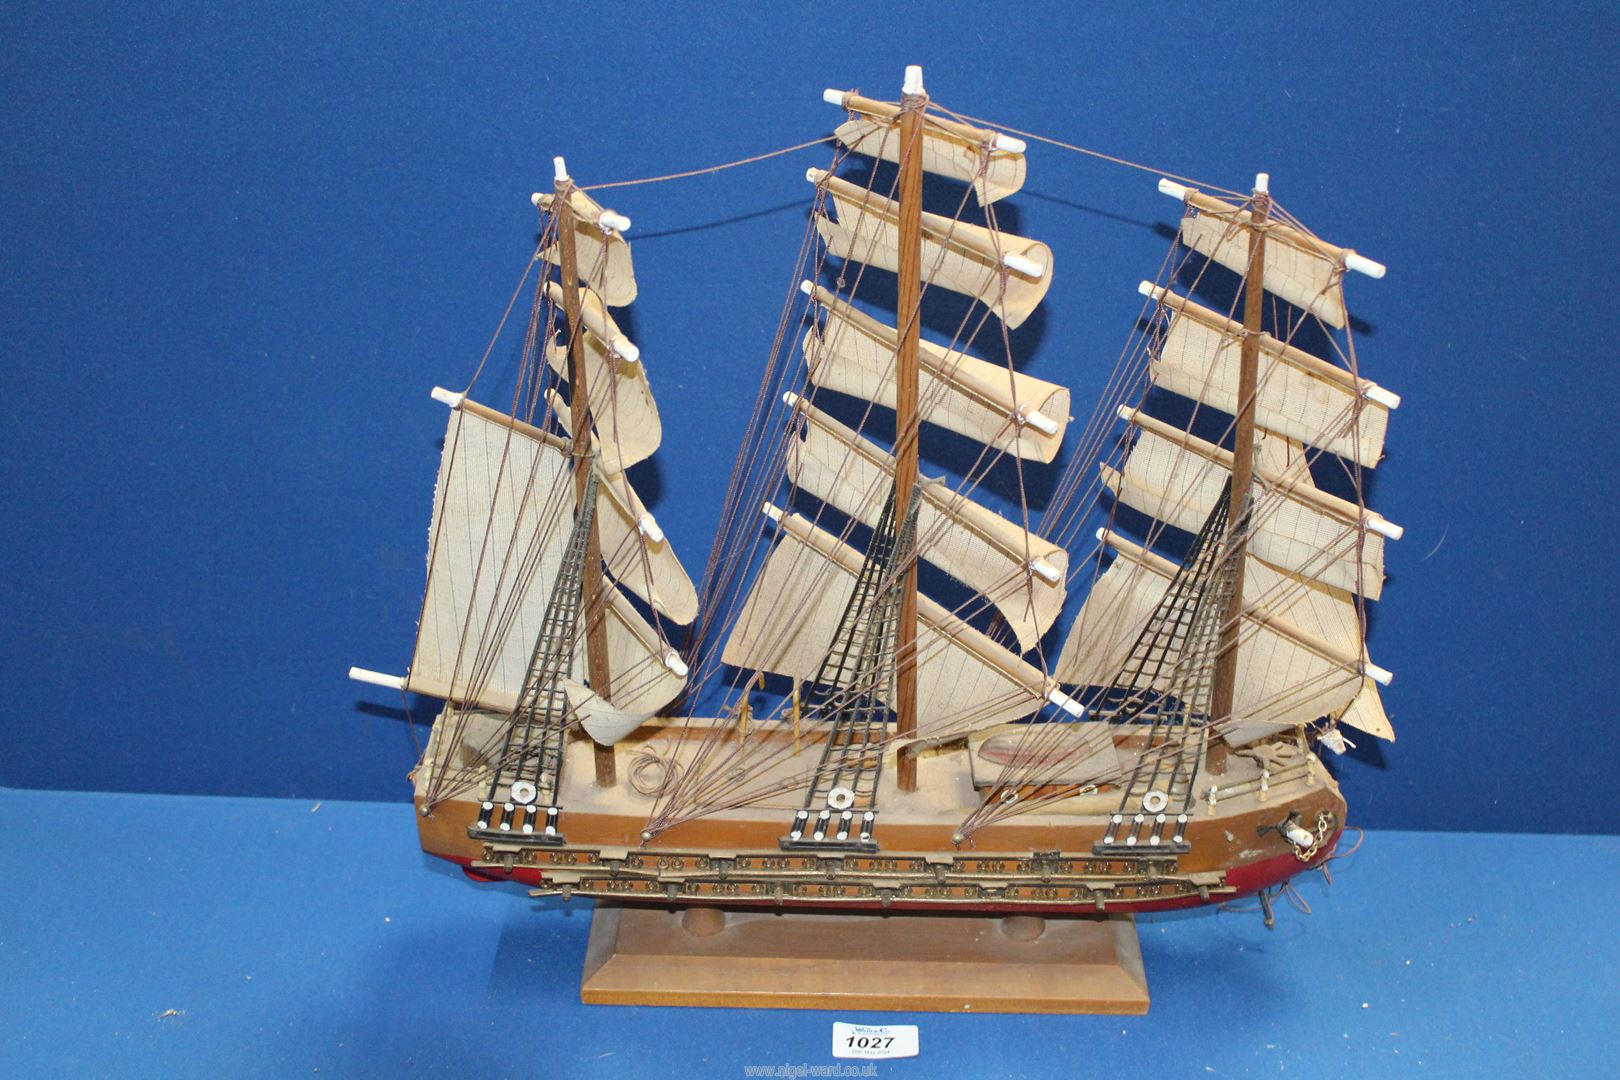 A model of 'Fragata Siglo XVIII' ship on stand with rigging and sail detail, 17" wide x 17" high. - Image 2 of 2